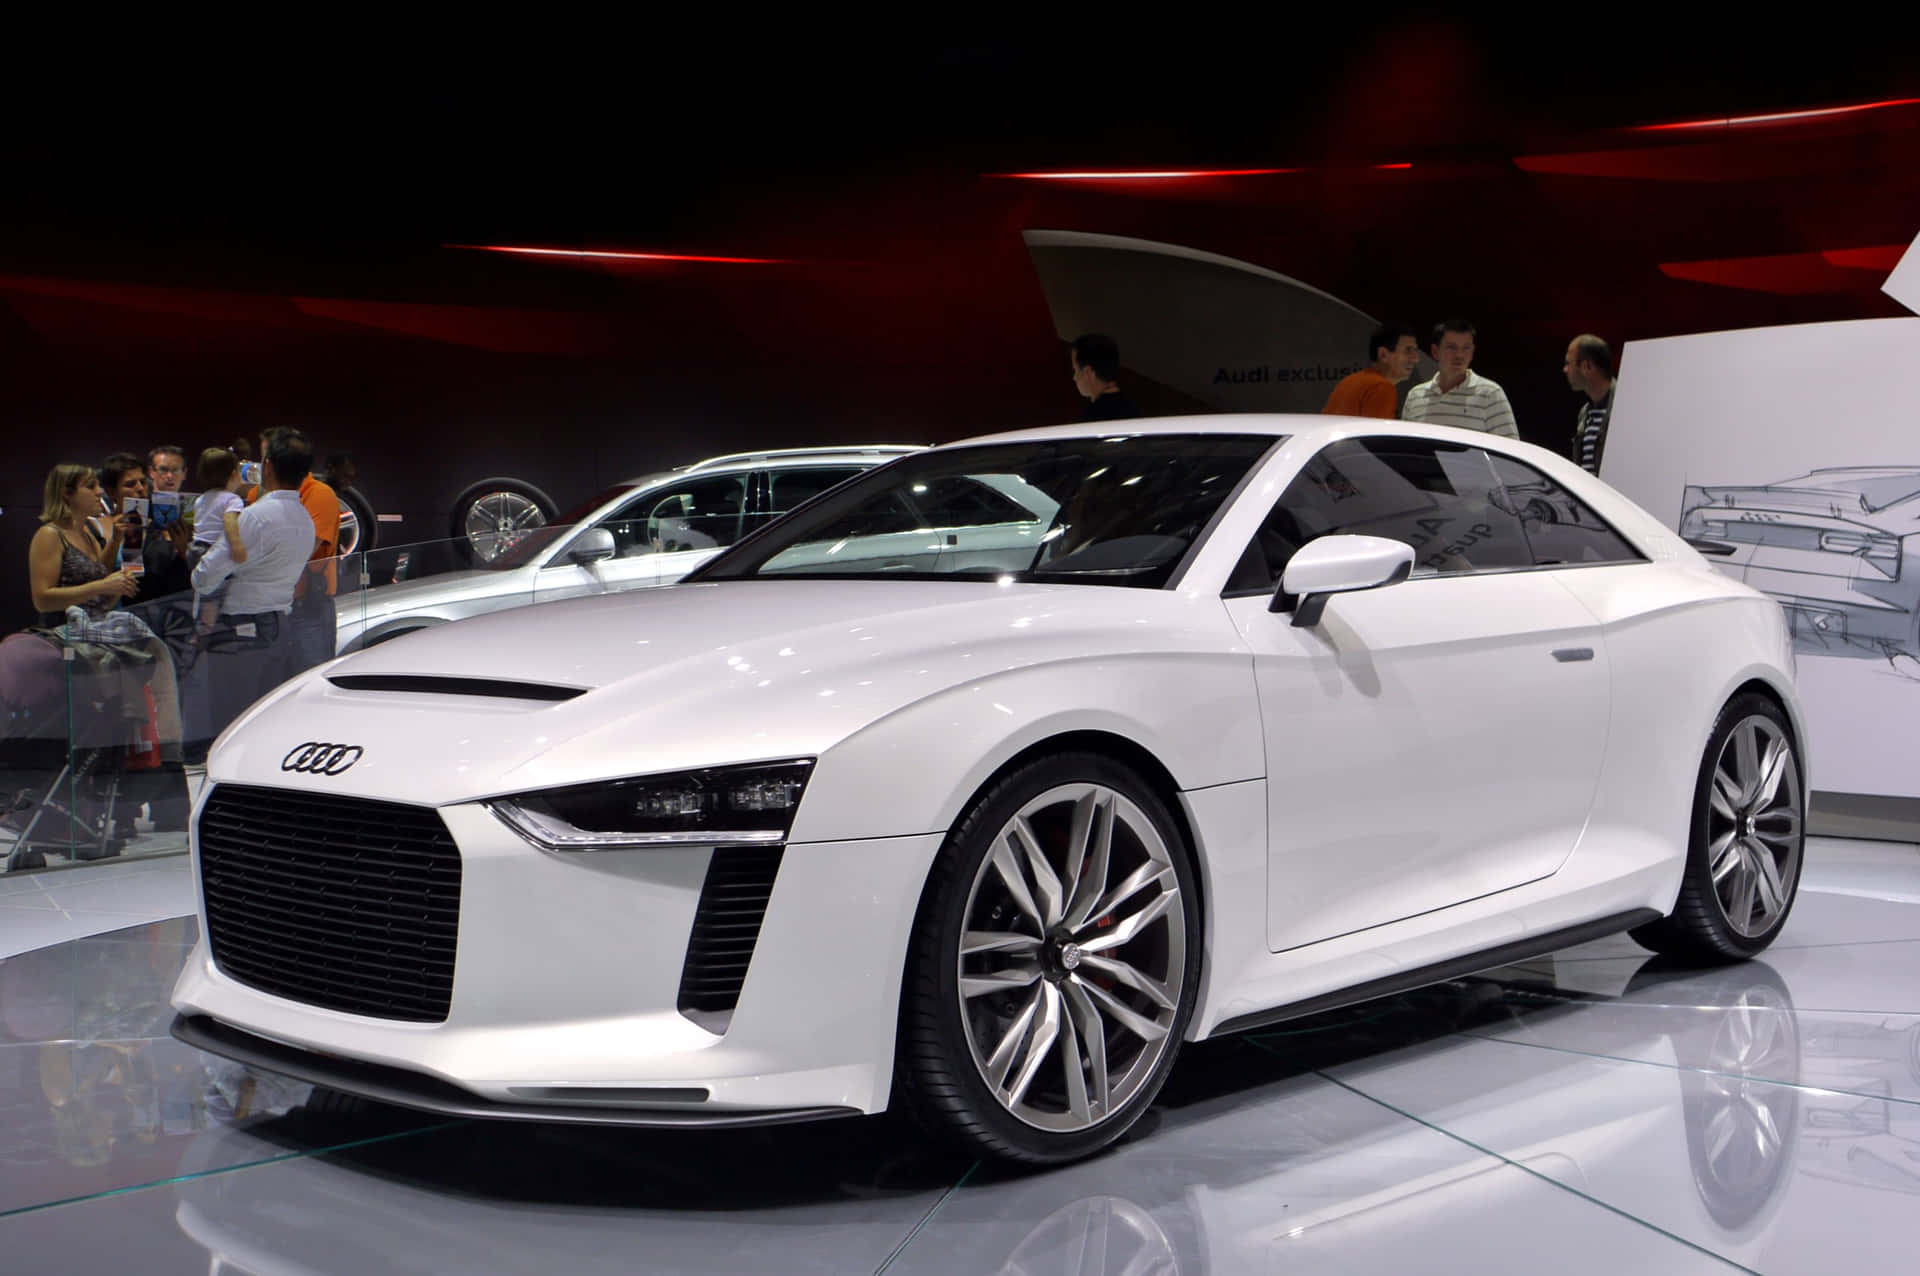 Sporty, Powerful, and Luxurious: Audi Delivers